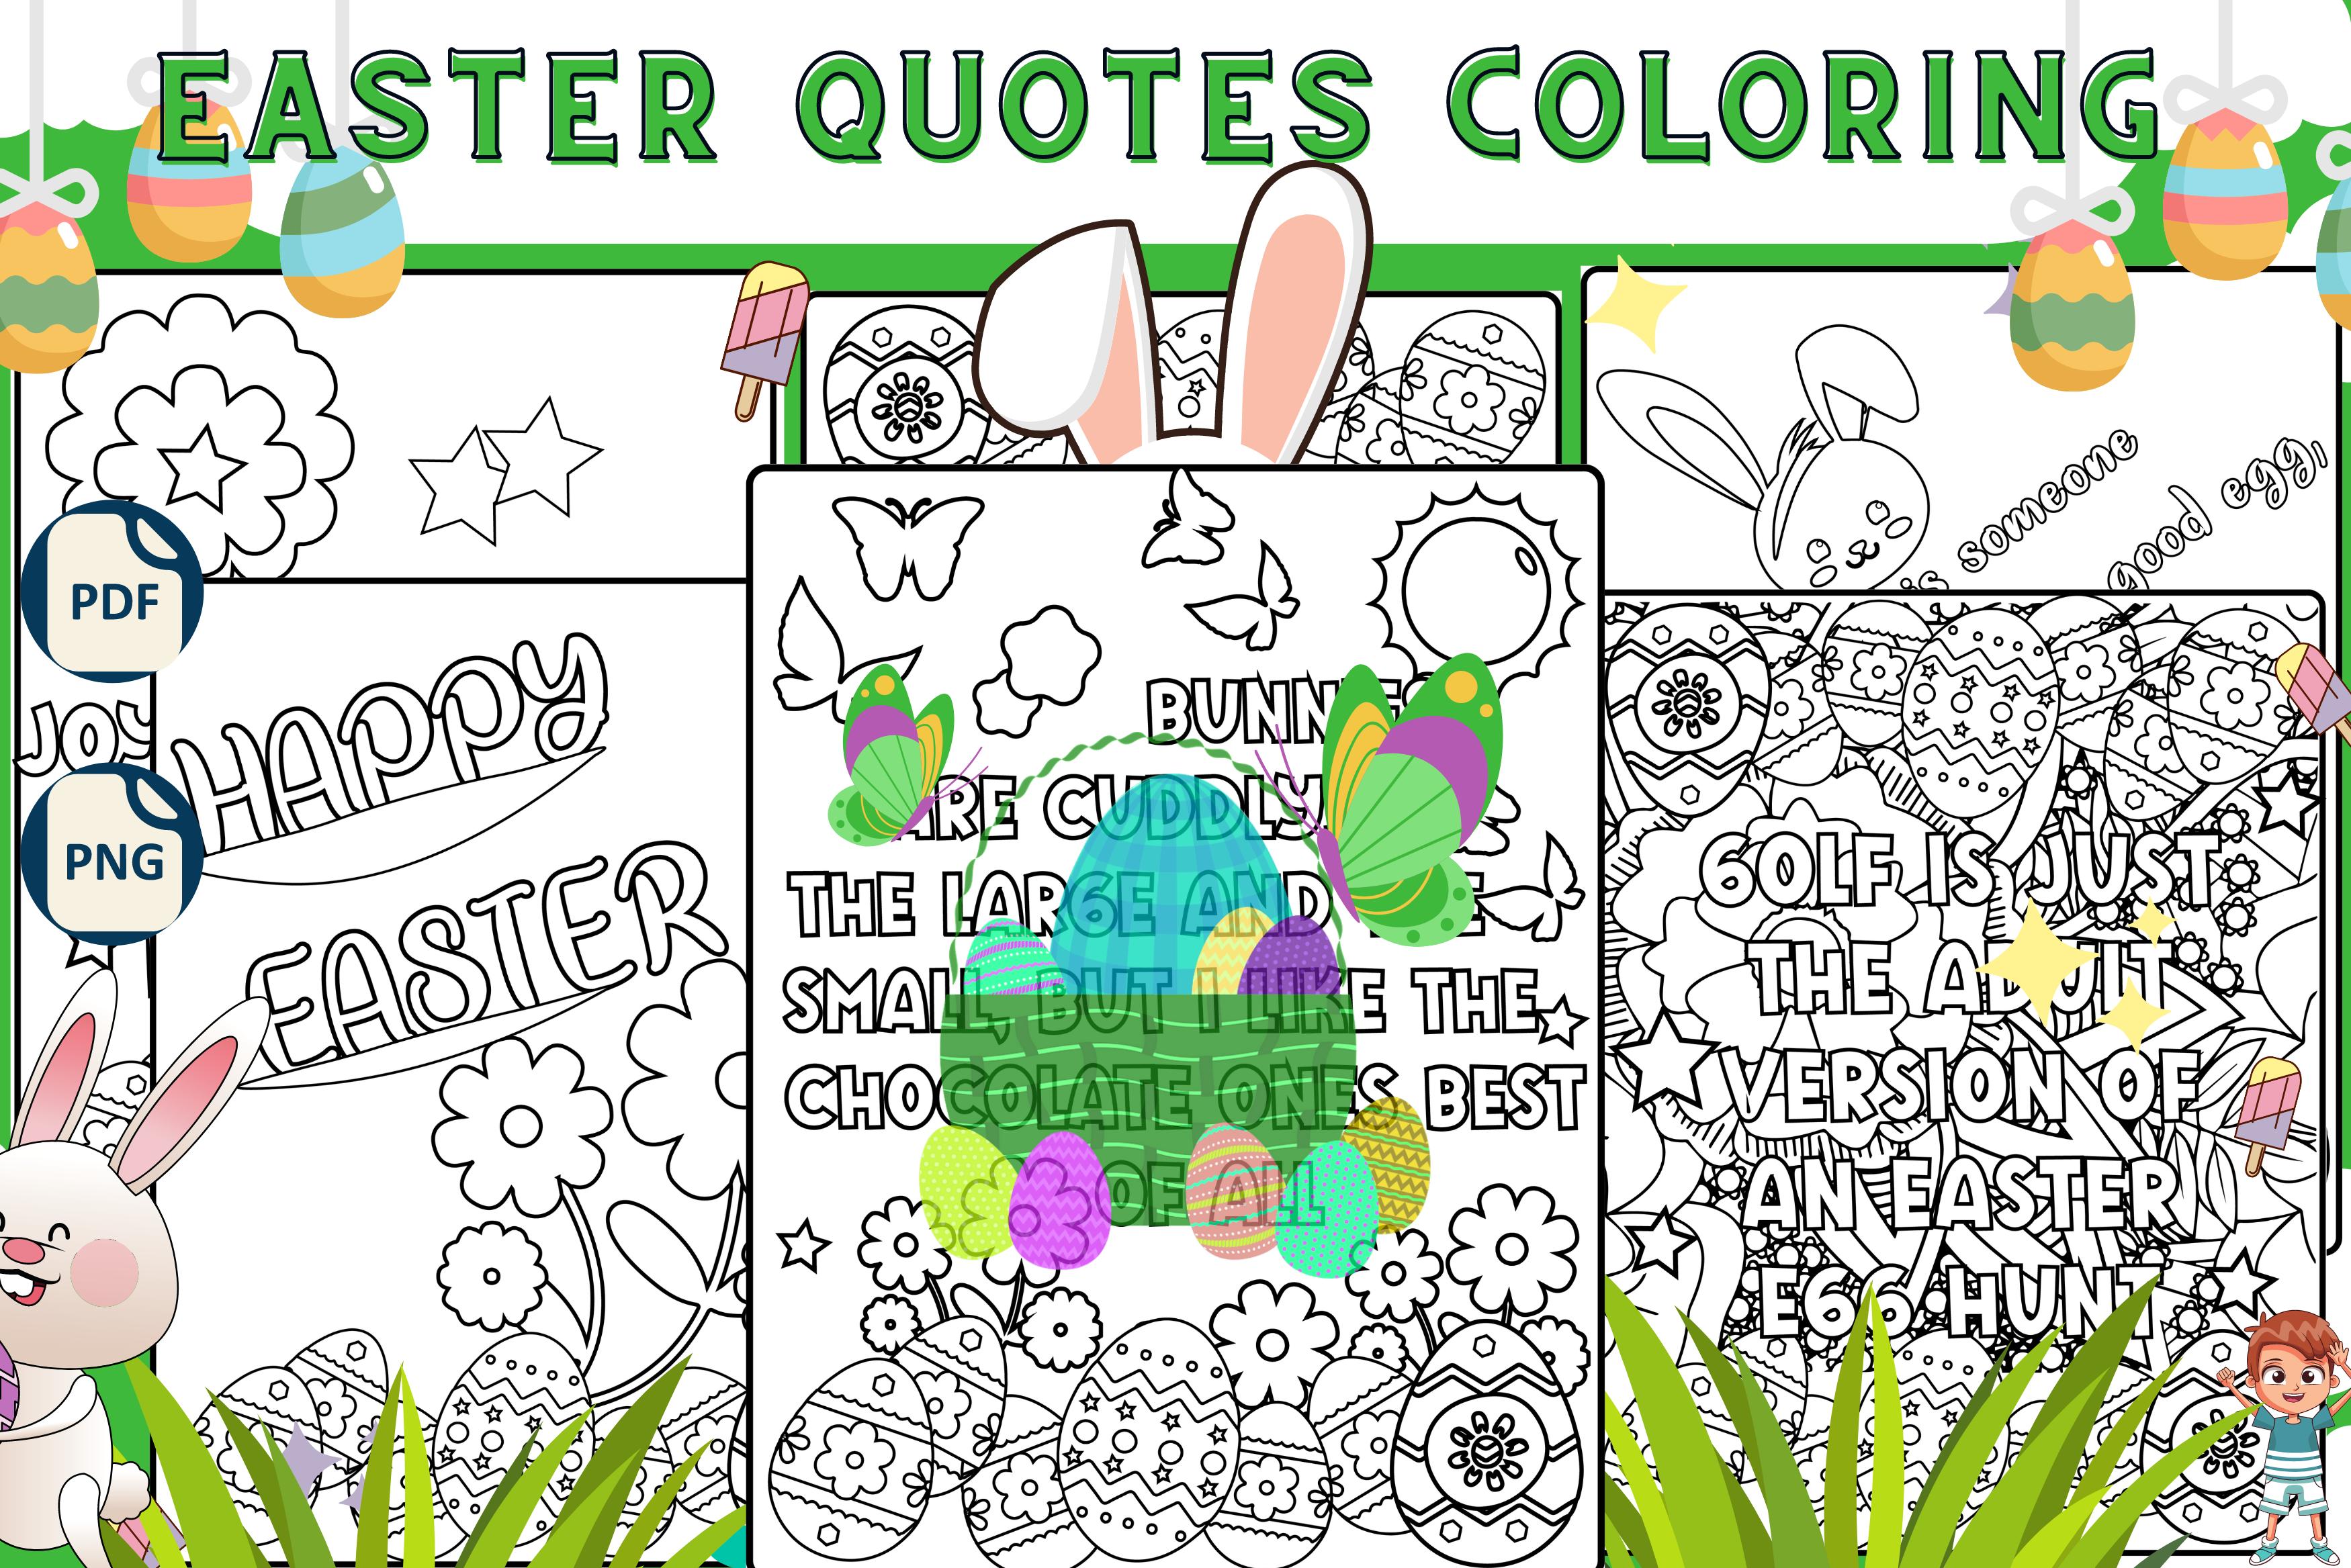 Easter Bunny Quotes Coloring Book